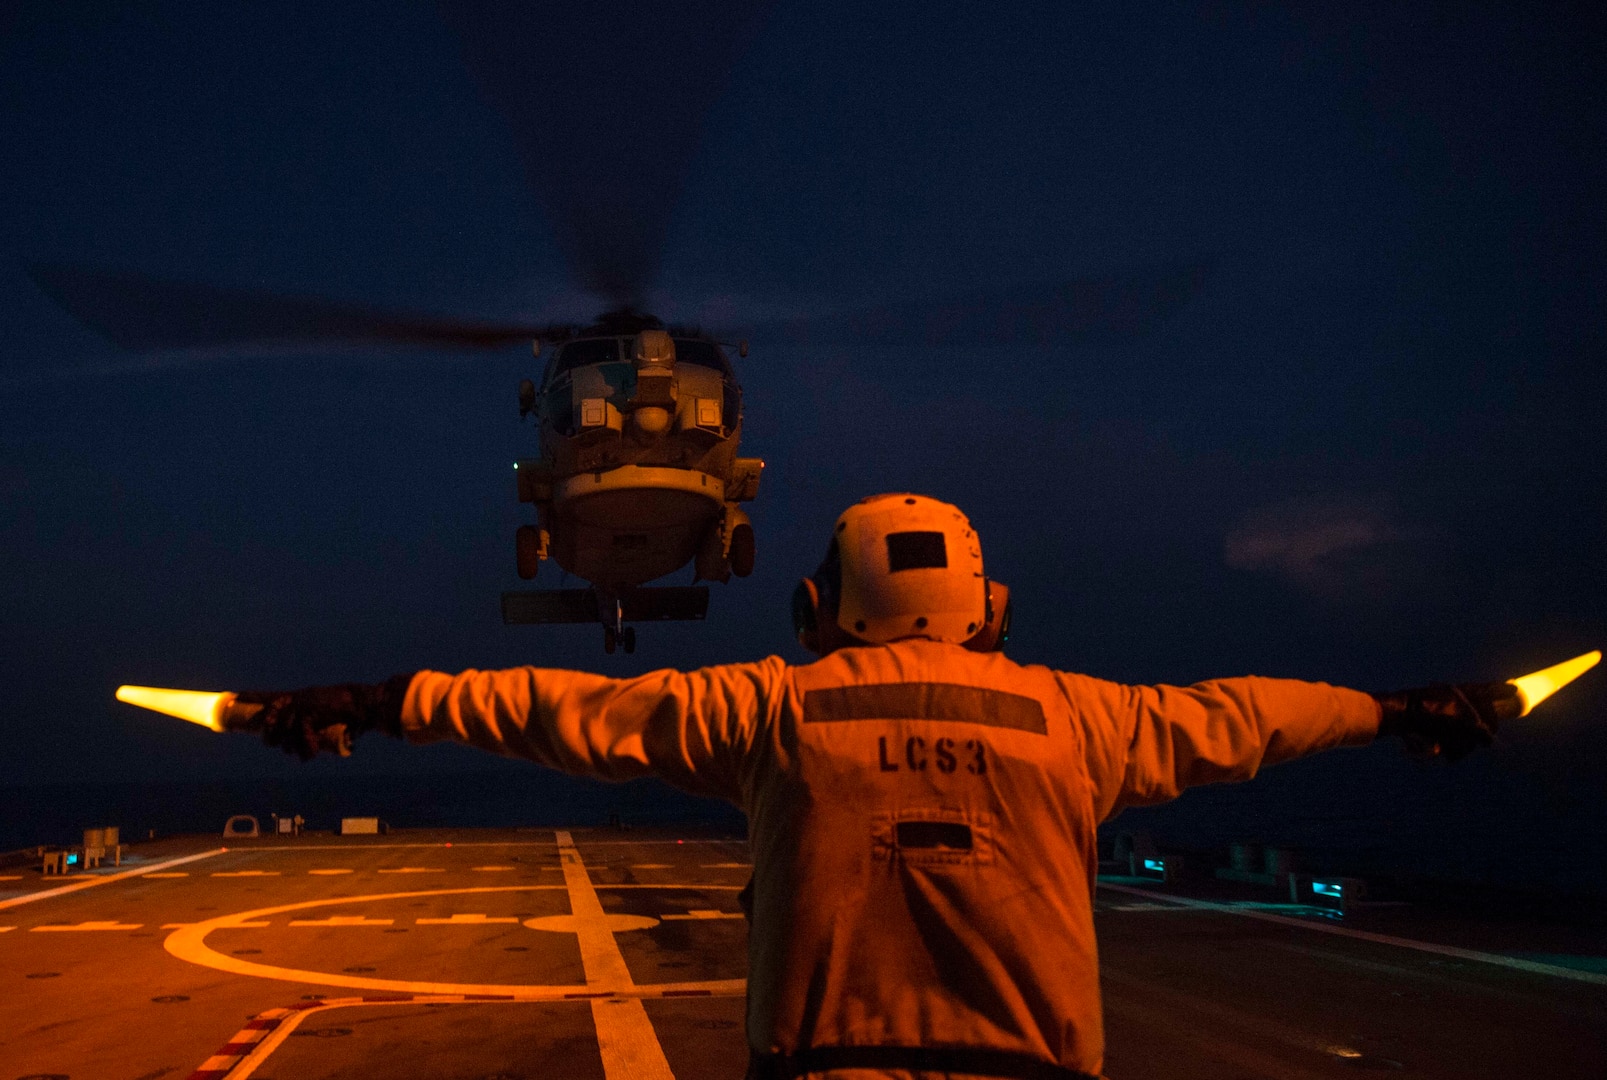 150930-N-MK881-458 BAY OF BENGAL (Sept. 30, 2015) Boatswain's Mate 2nd Class Manuel Gallegos, assigned to the littoral combat ship USS Fort Worth (LCS 3), directs an MH-60R Sea Hawk helicopter attached to Helicopter Maritime Strike Squadron (HSM) 35 during deck landing exercises as part of Cooperation Afloat Readiness and Training (CARAT) Bangladesh 2015. CARAT is an annual, bilateral exercise series with the U.S. Navy, U.S. Marine Corps and the armed forces of nine partner nations. (U.S. Navy photo by Mass Communication Specialist 2nd Class Joe Bishop/Released)